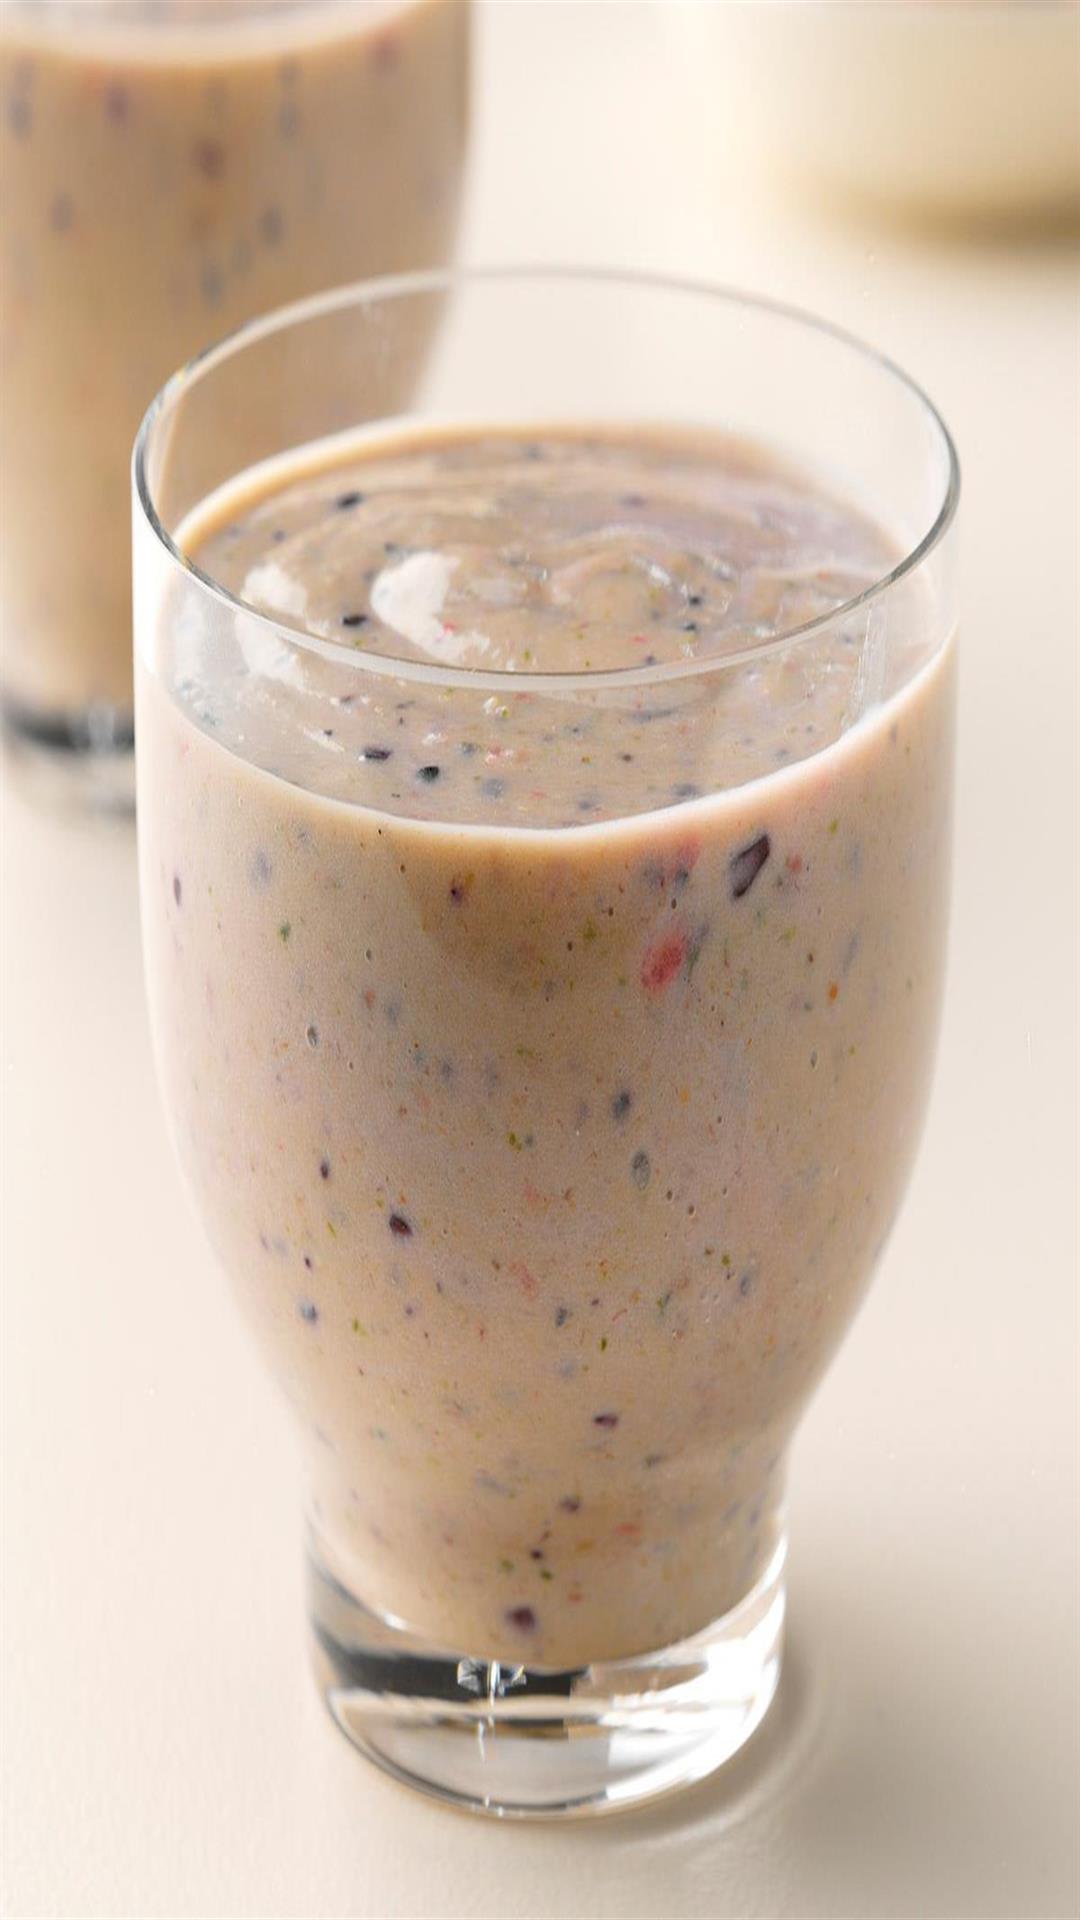 Brain Food Smoothie Recipe: How to Make It